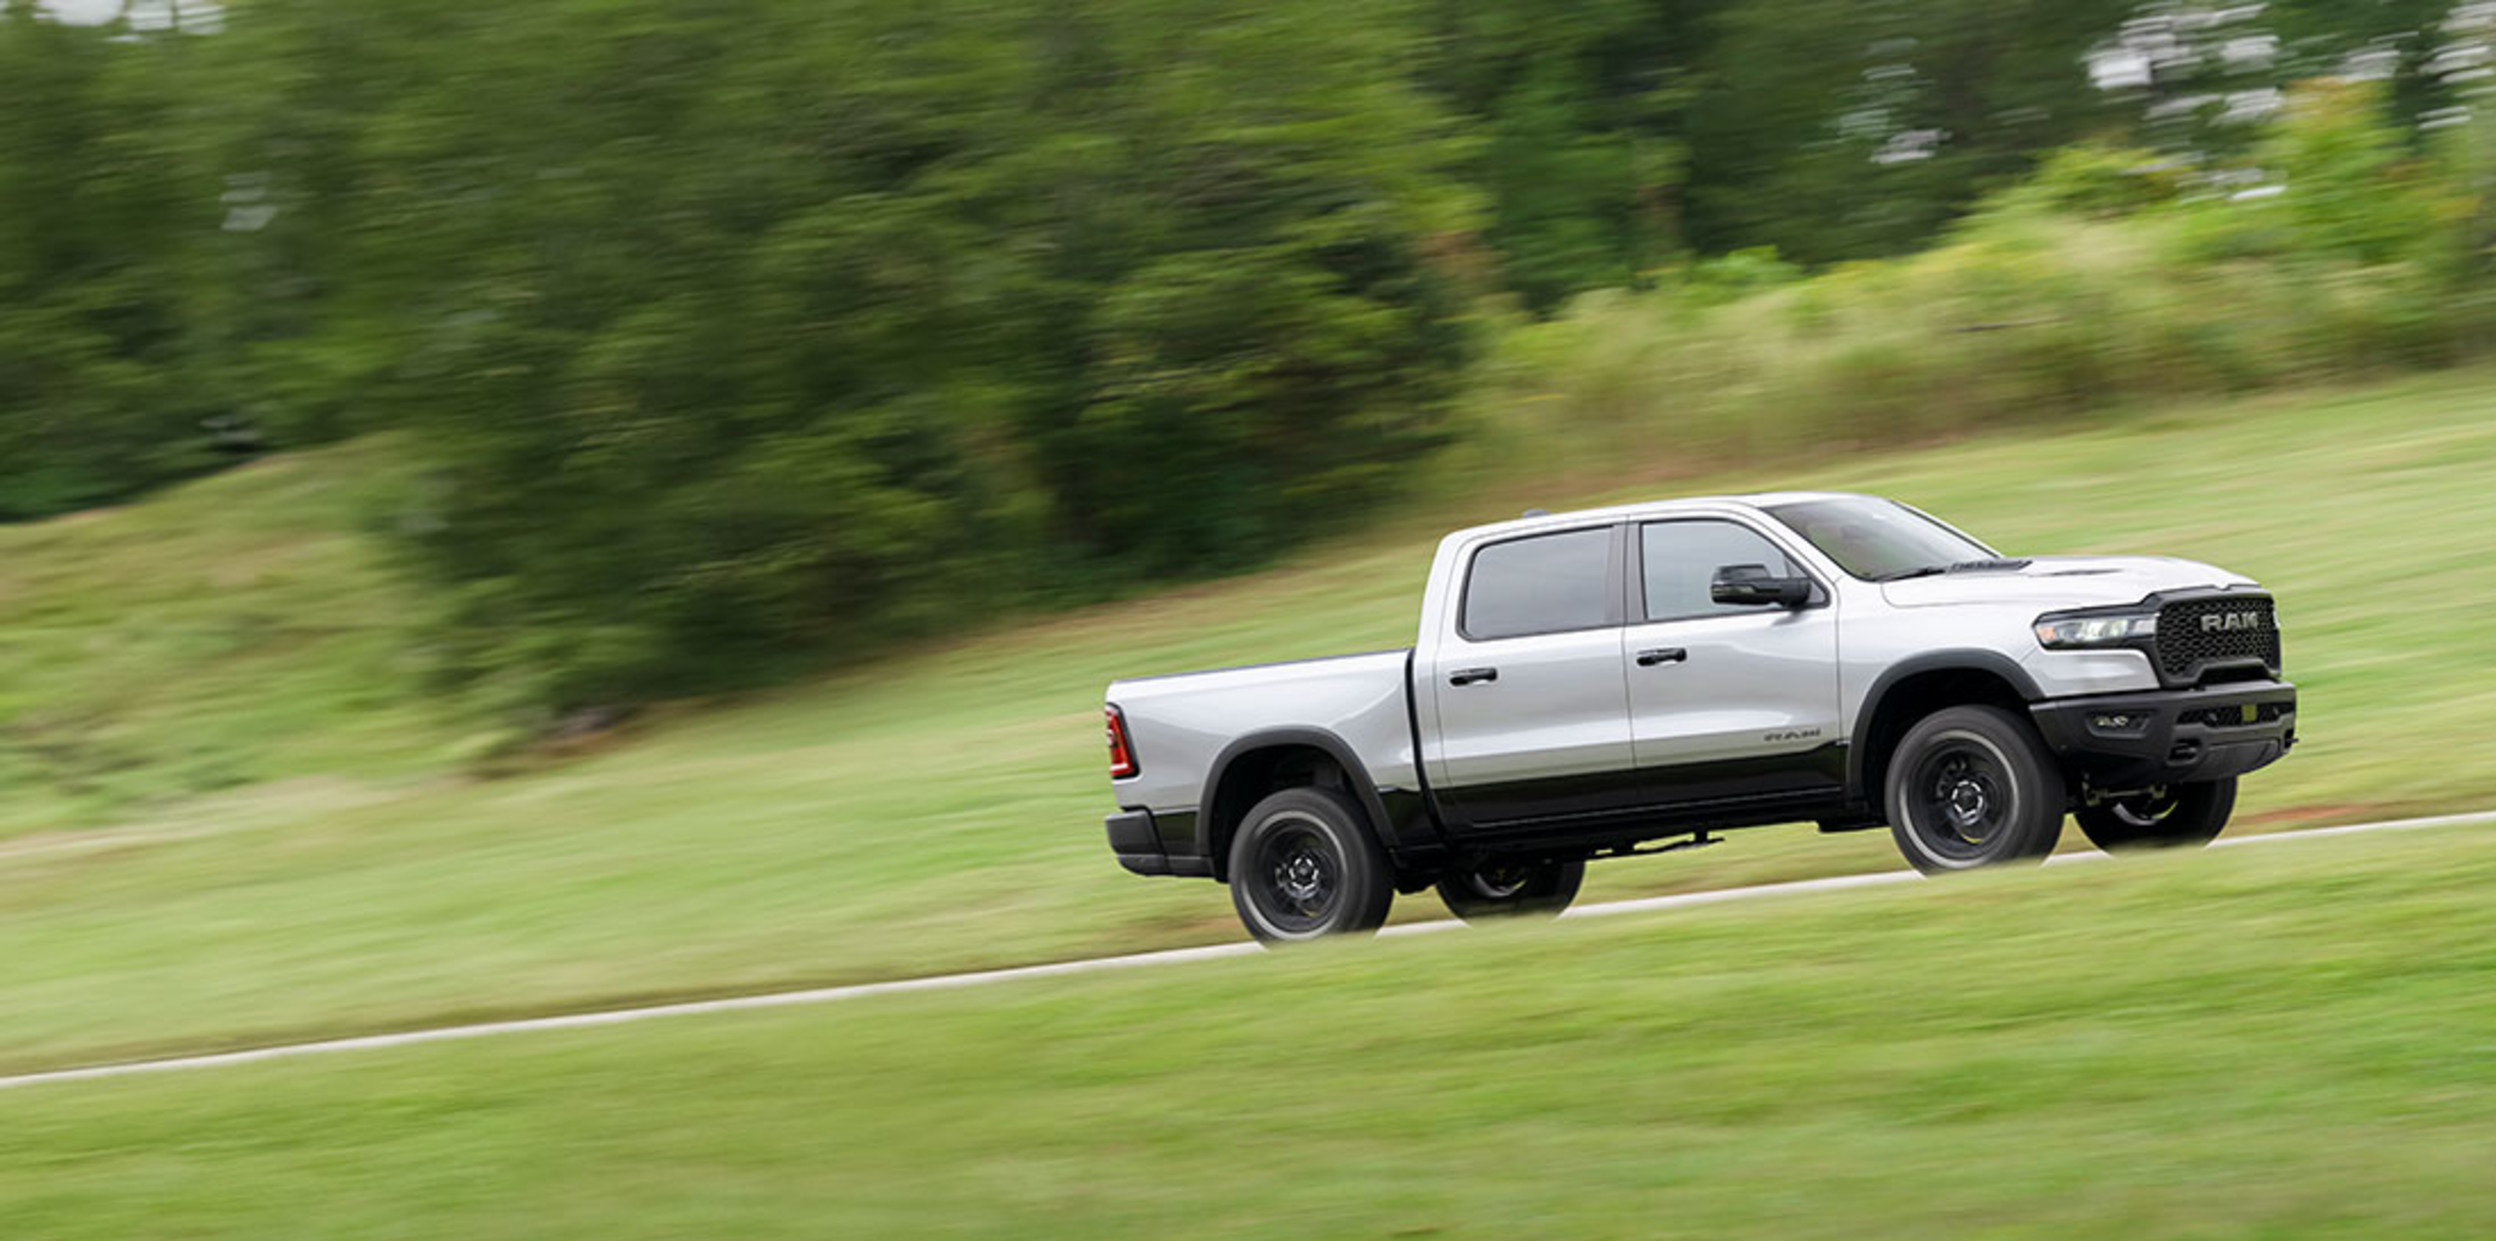 A profile view of a grey 2025 Ram 1500 shown driving on a path with trees shown in the distance.